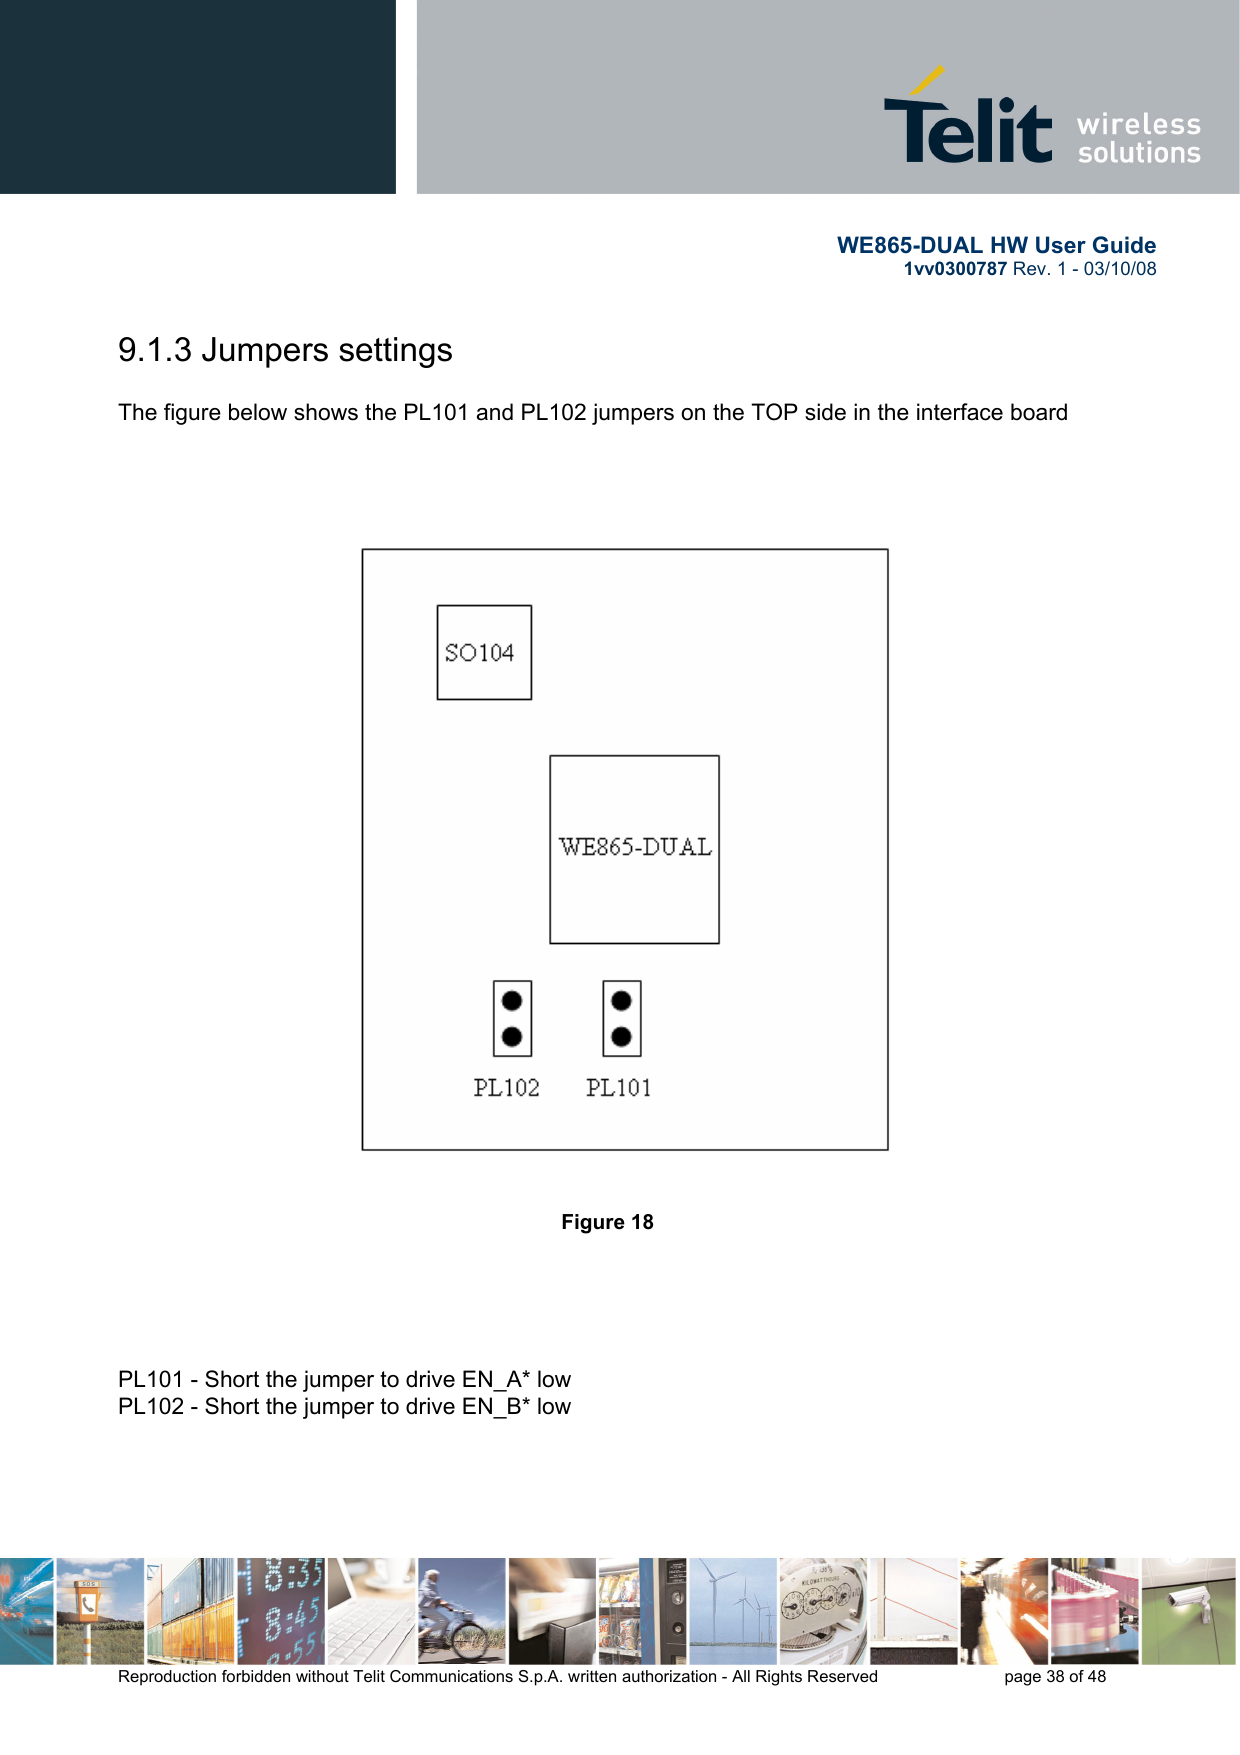       WE865-DUAL HW User Guide 1vv0300787 Rev. 1 - 03/10/08      Reproduction forbidden without Telit Communications S.p.A. written authorization - All Rights Reserved    page 38 of 48  9.1.3 Jumpers settings  The figure below shows the PL101 and PL102 jumpers on the TOP side in the interface board         Figure 18           PL101 - Short the jumper to drive EN_A* low PL102 - Short the jumper to drive EN_B* low   